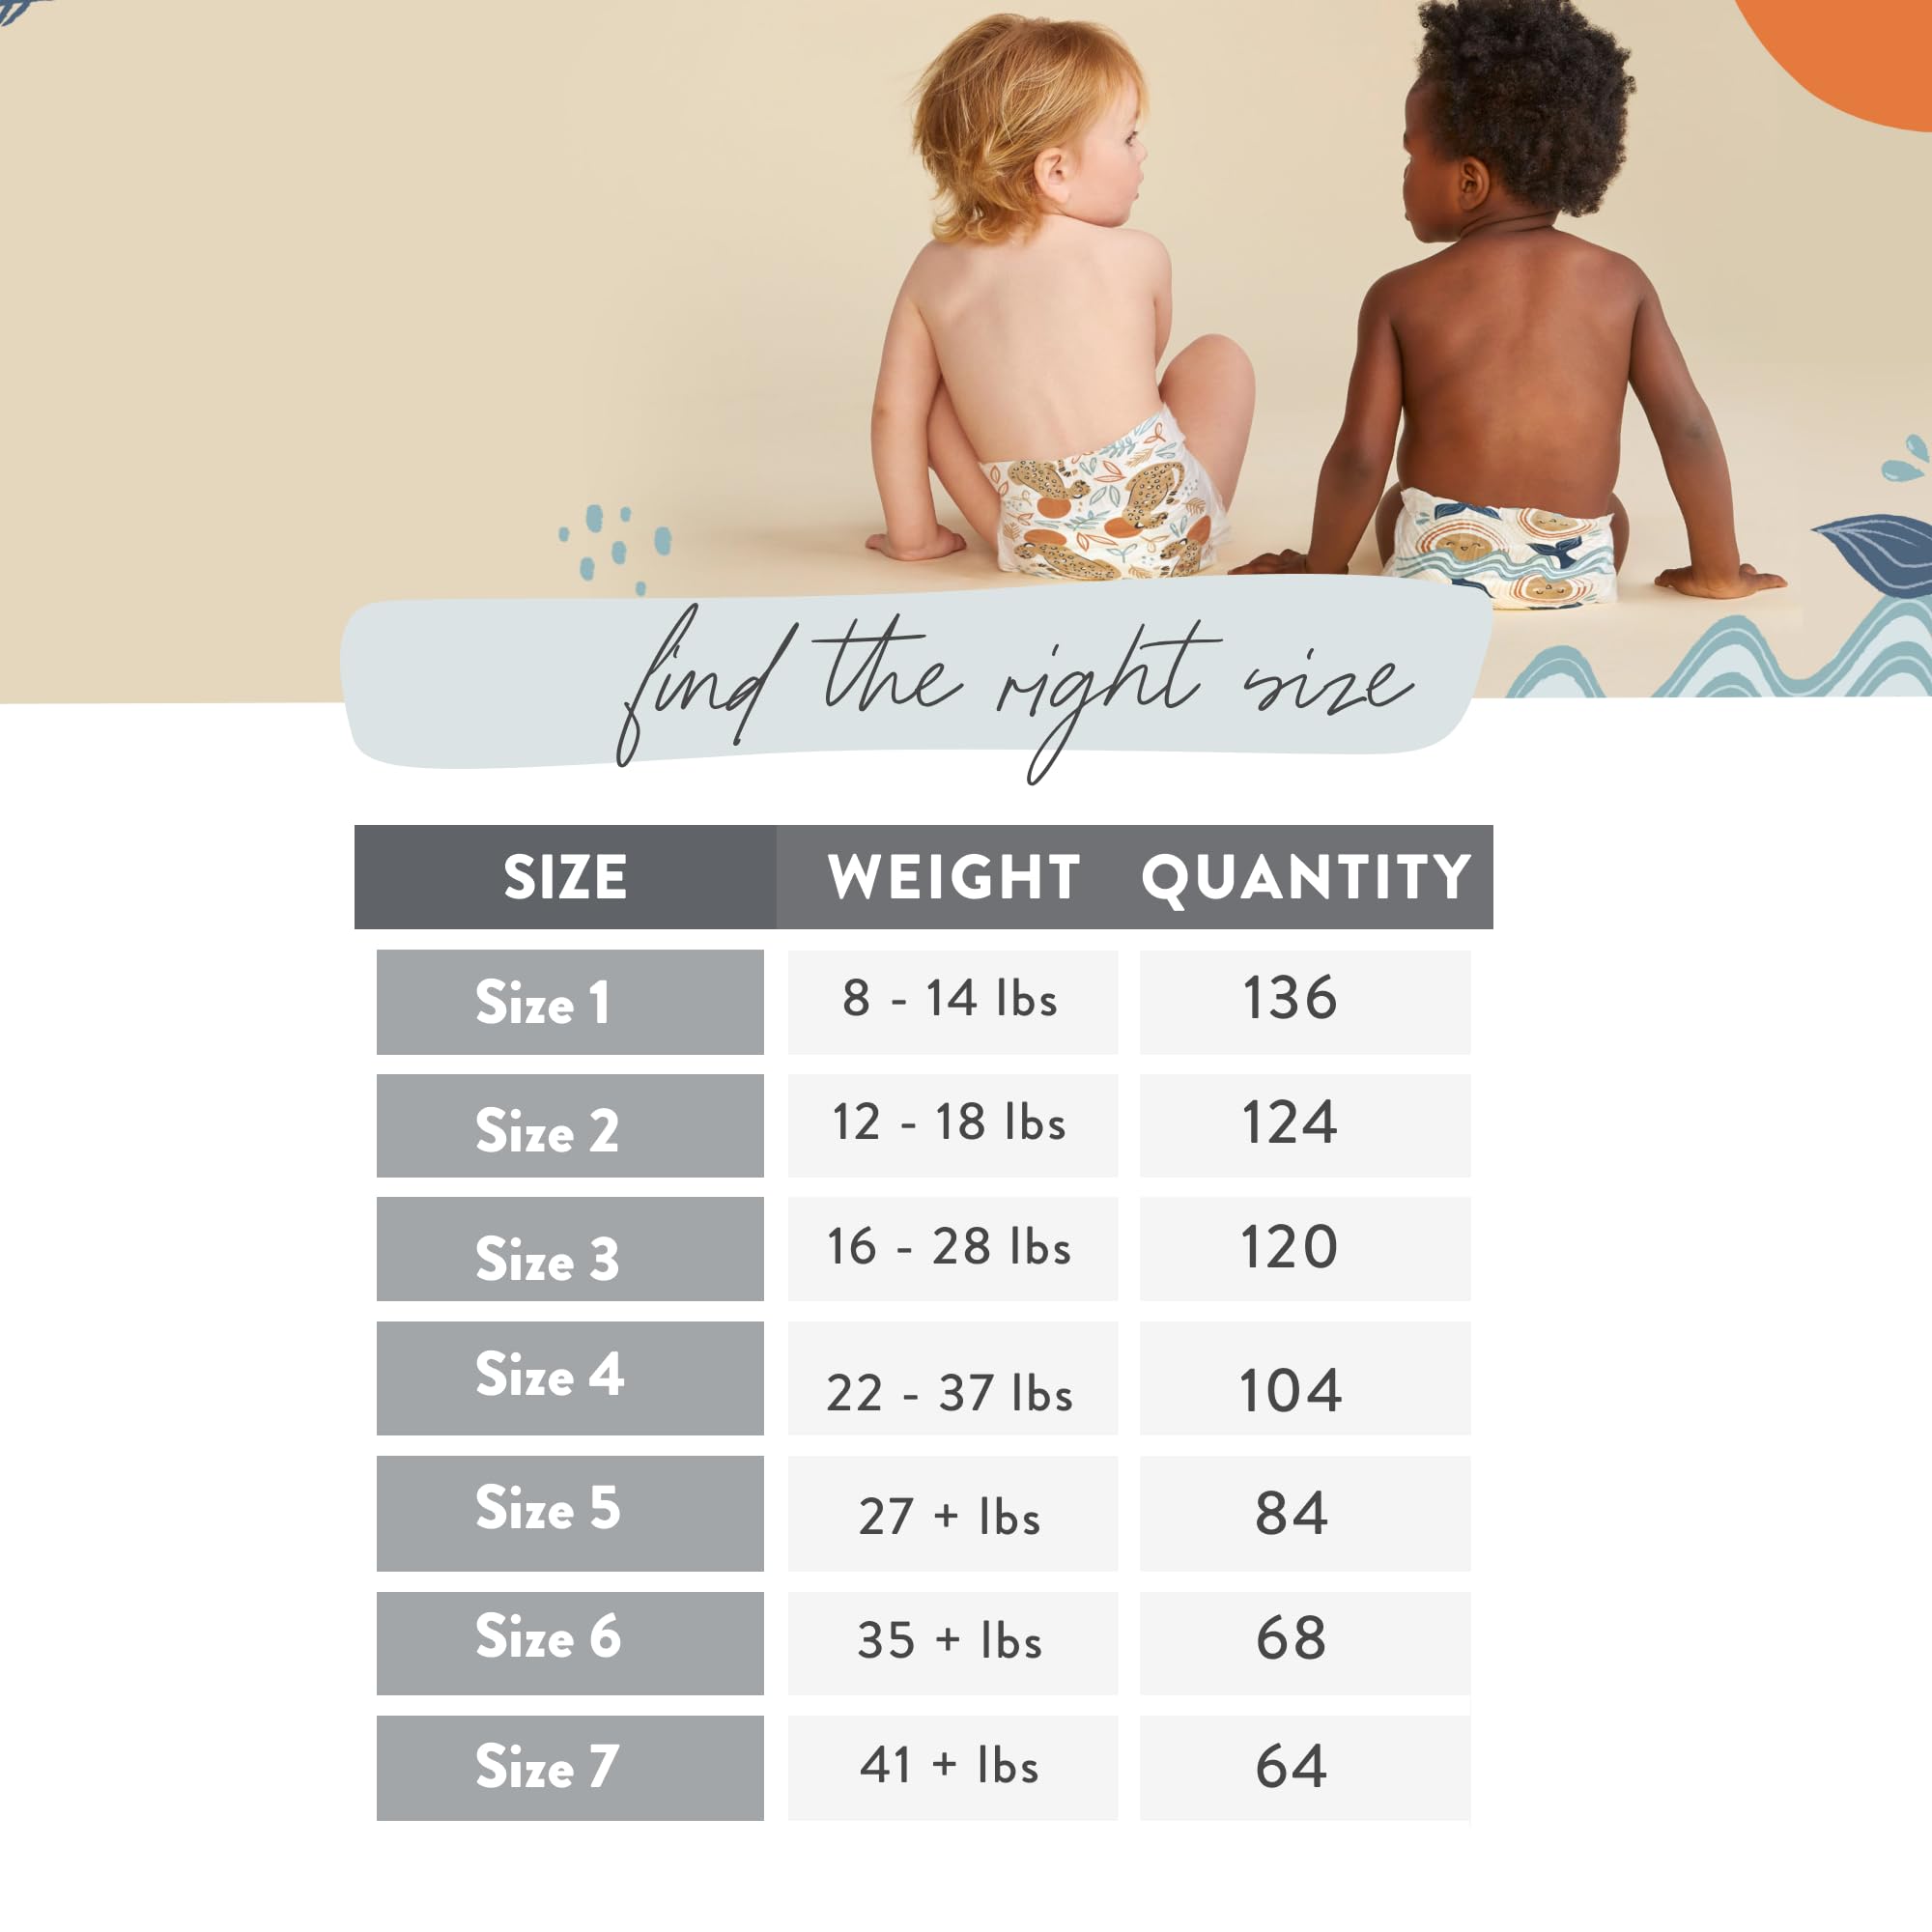 The Honest Company Clean Conscious Diapers | Plant-Based, Sustainable | Pandas + Barnyard Babies | Super Club Box, Size 2 (12-18 lbs), 124 Count